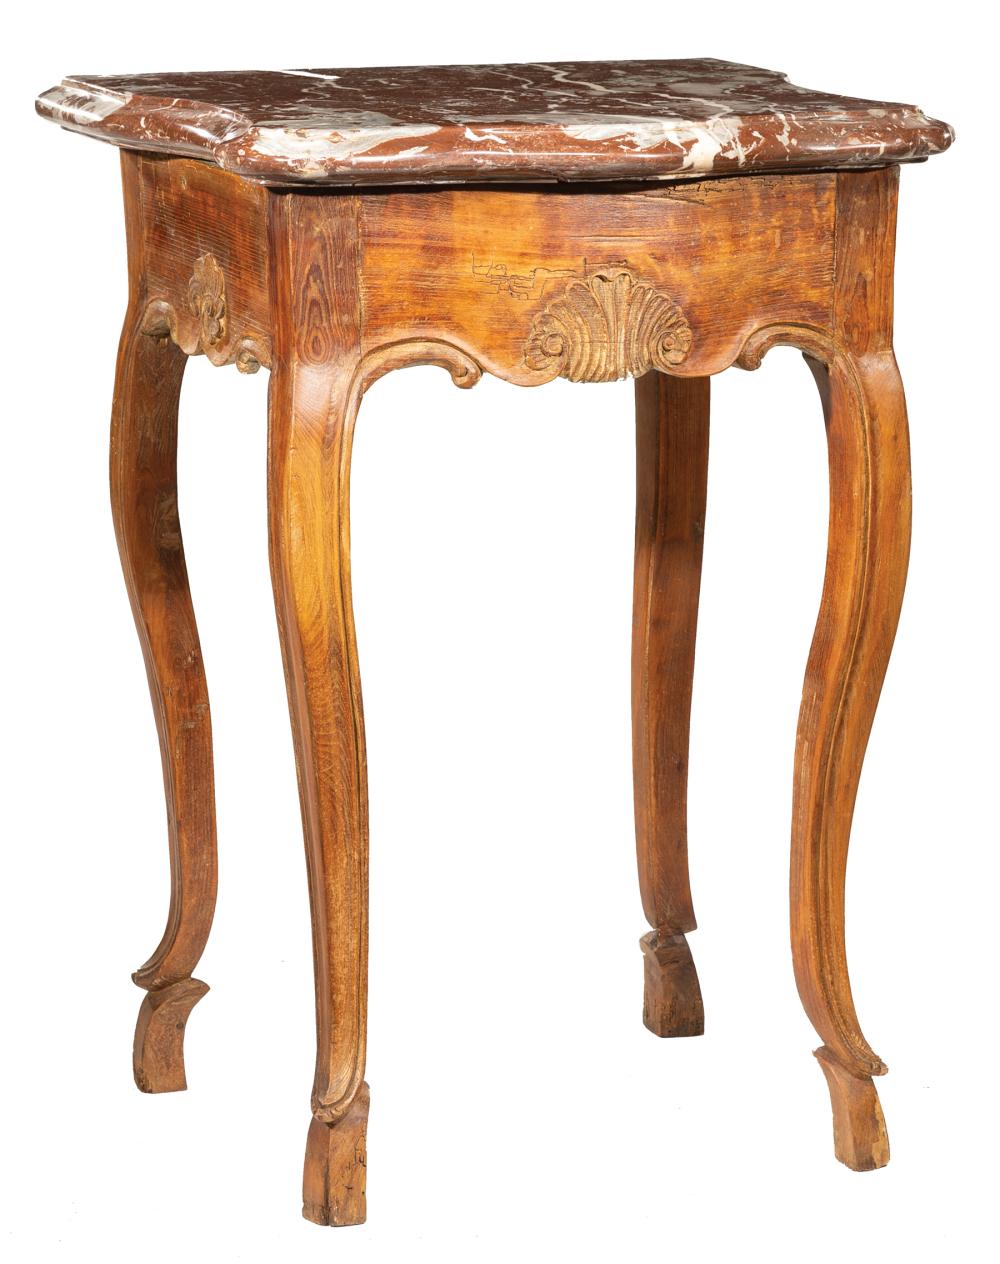 PROVINCIAL LOUIS XV FRUITWOOD SIDE